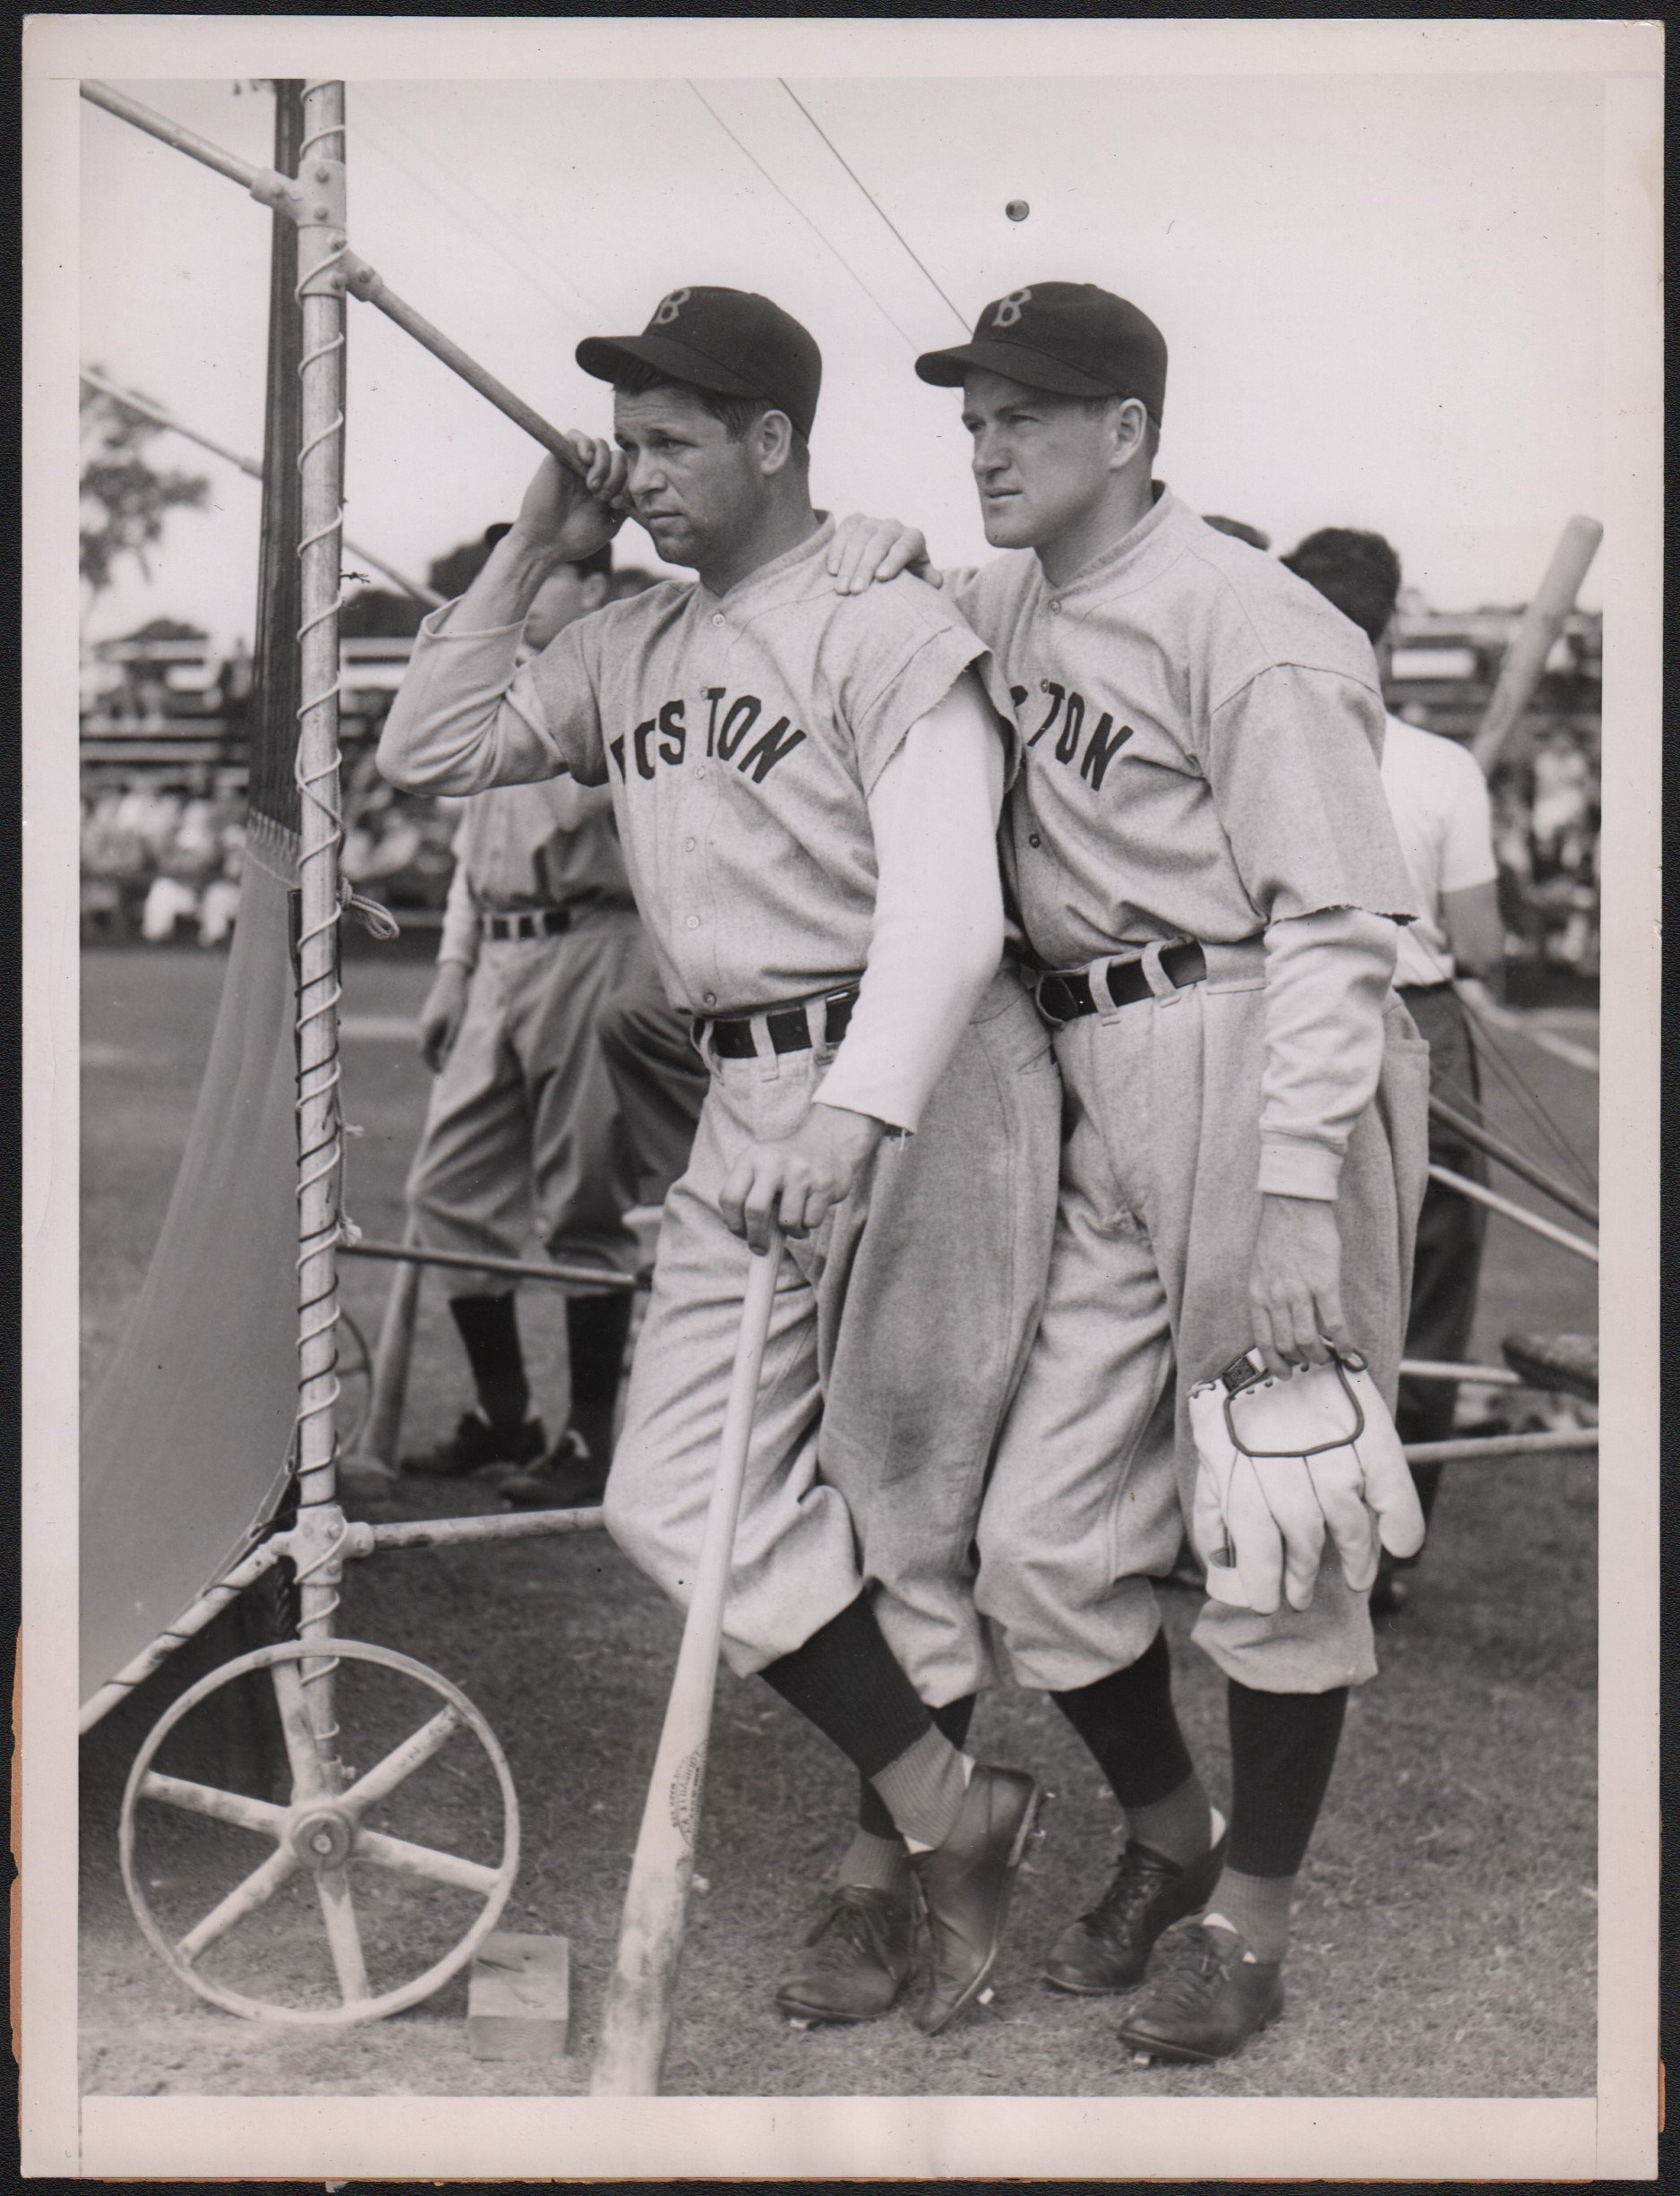 Baseball Photographs - 1936 Jimmie Foxx's First Day w/Boston Red Sox and Joe Cronin Watching Type I Photograph